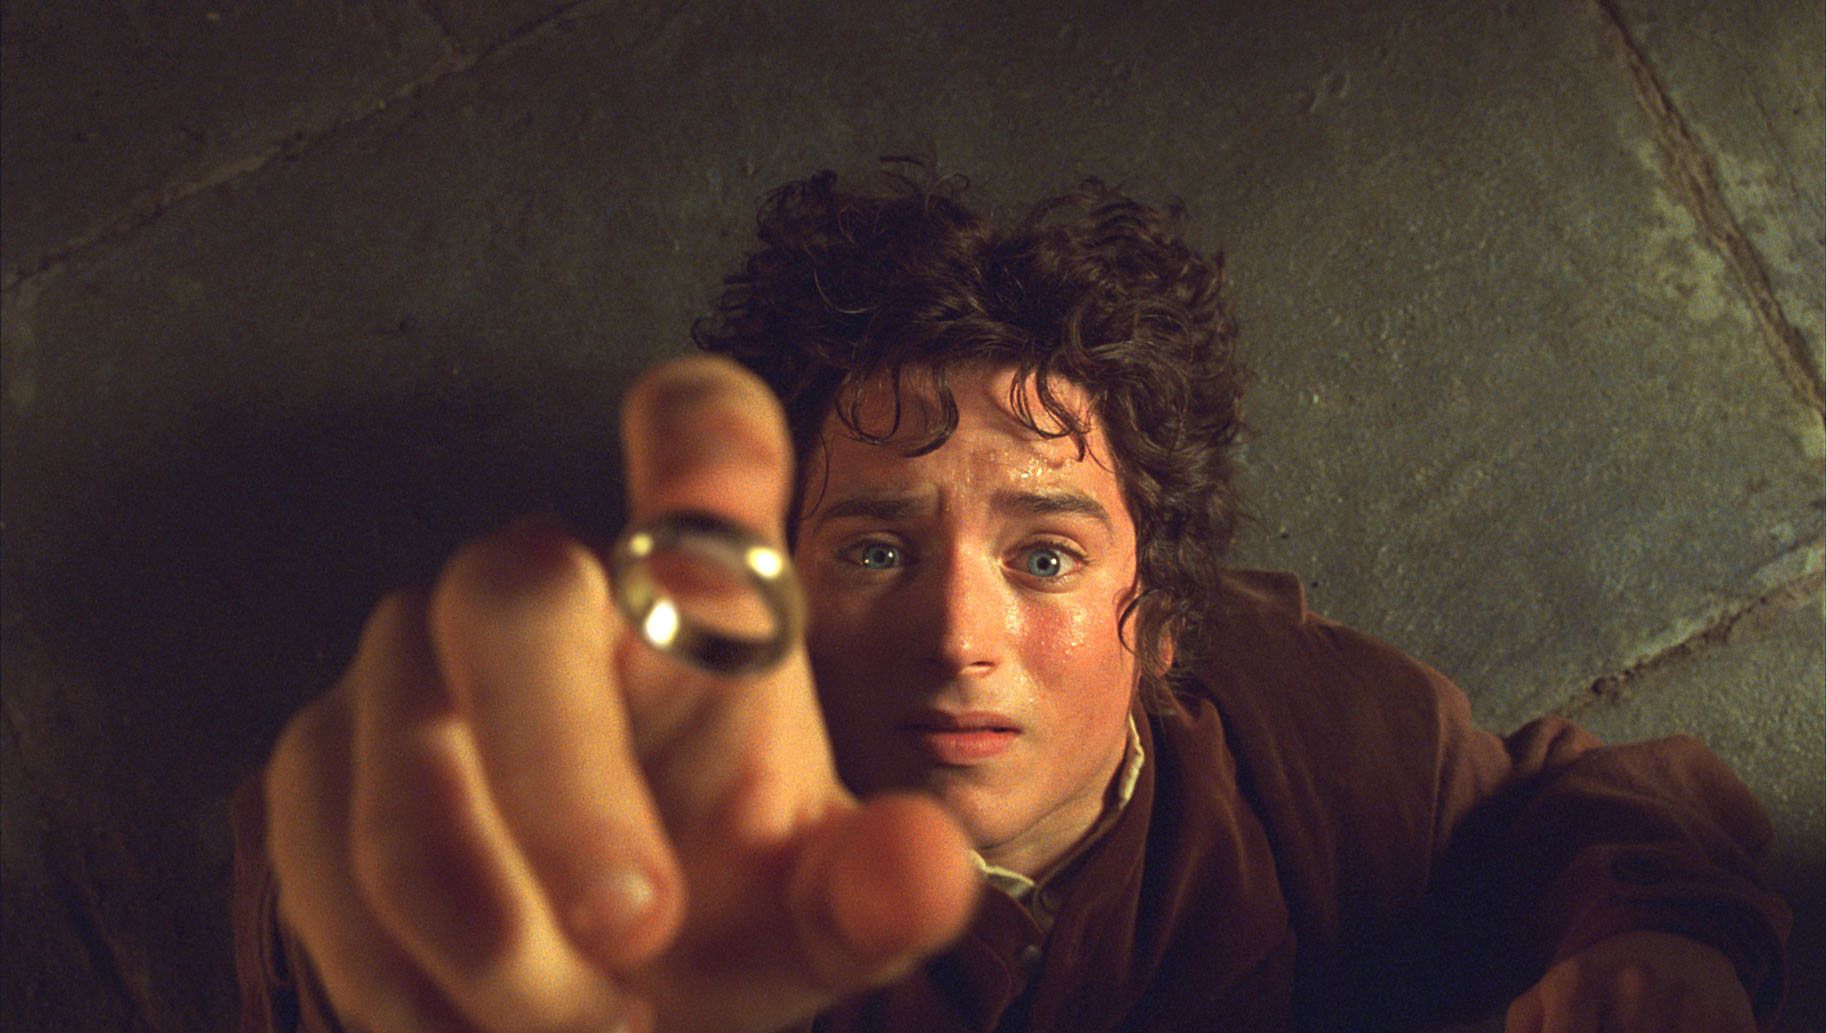 New Lord of the Rings Movies From Warners Bros. in the Works